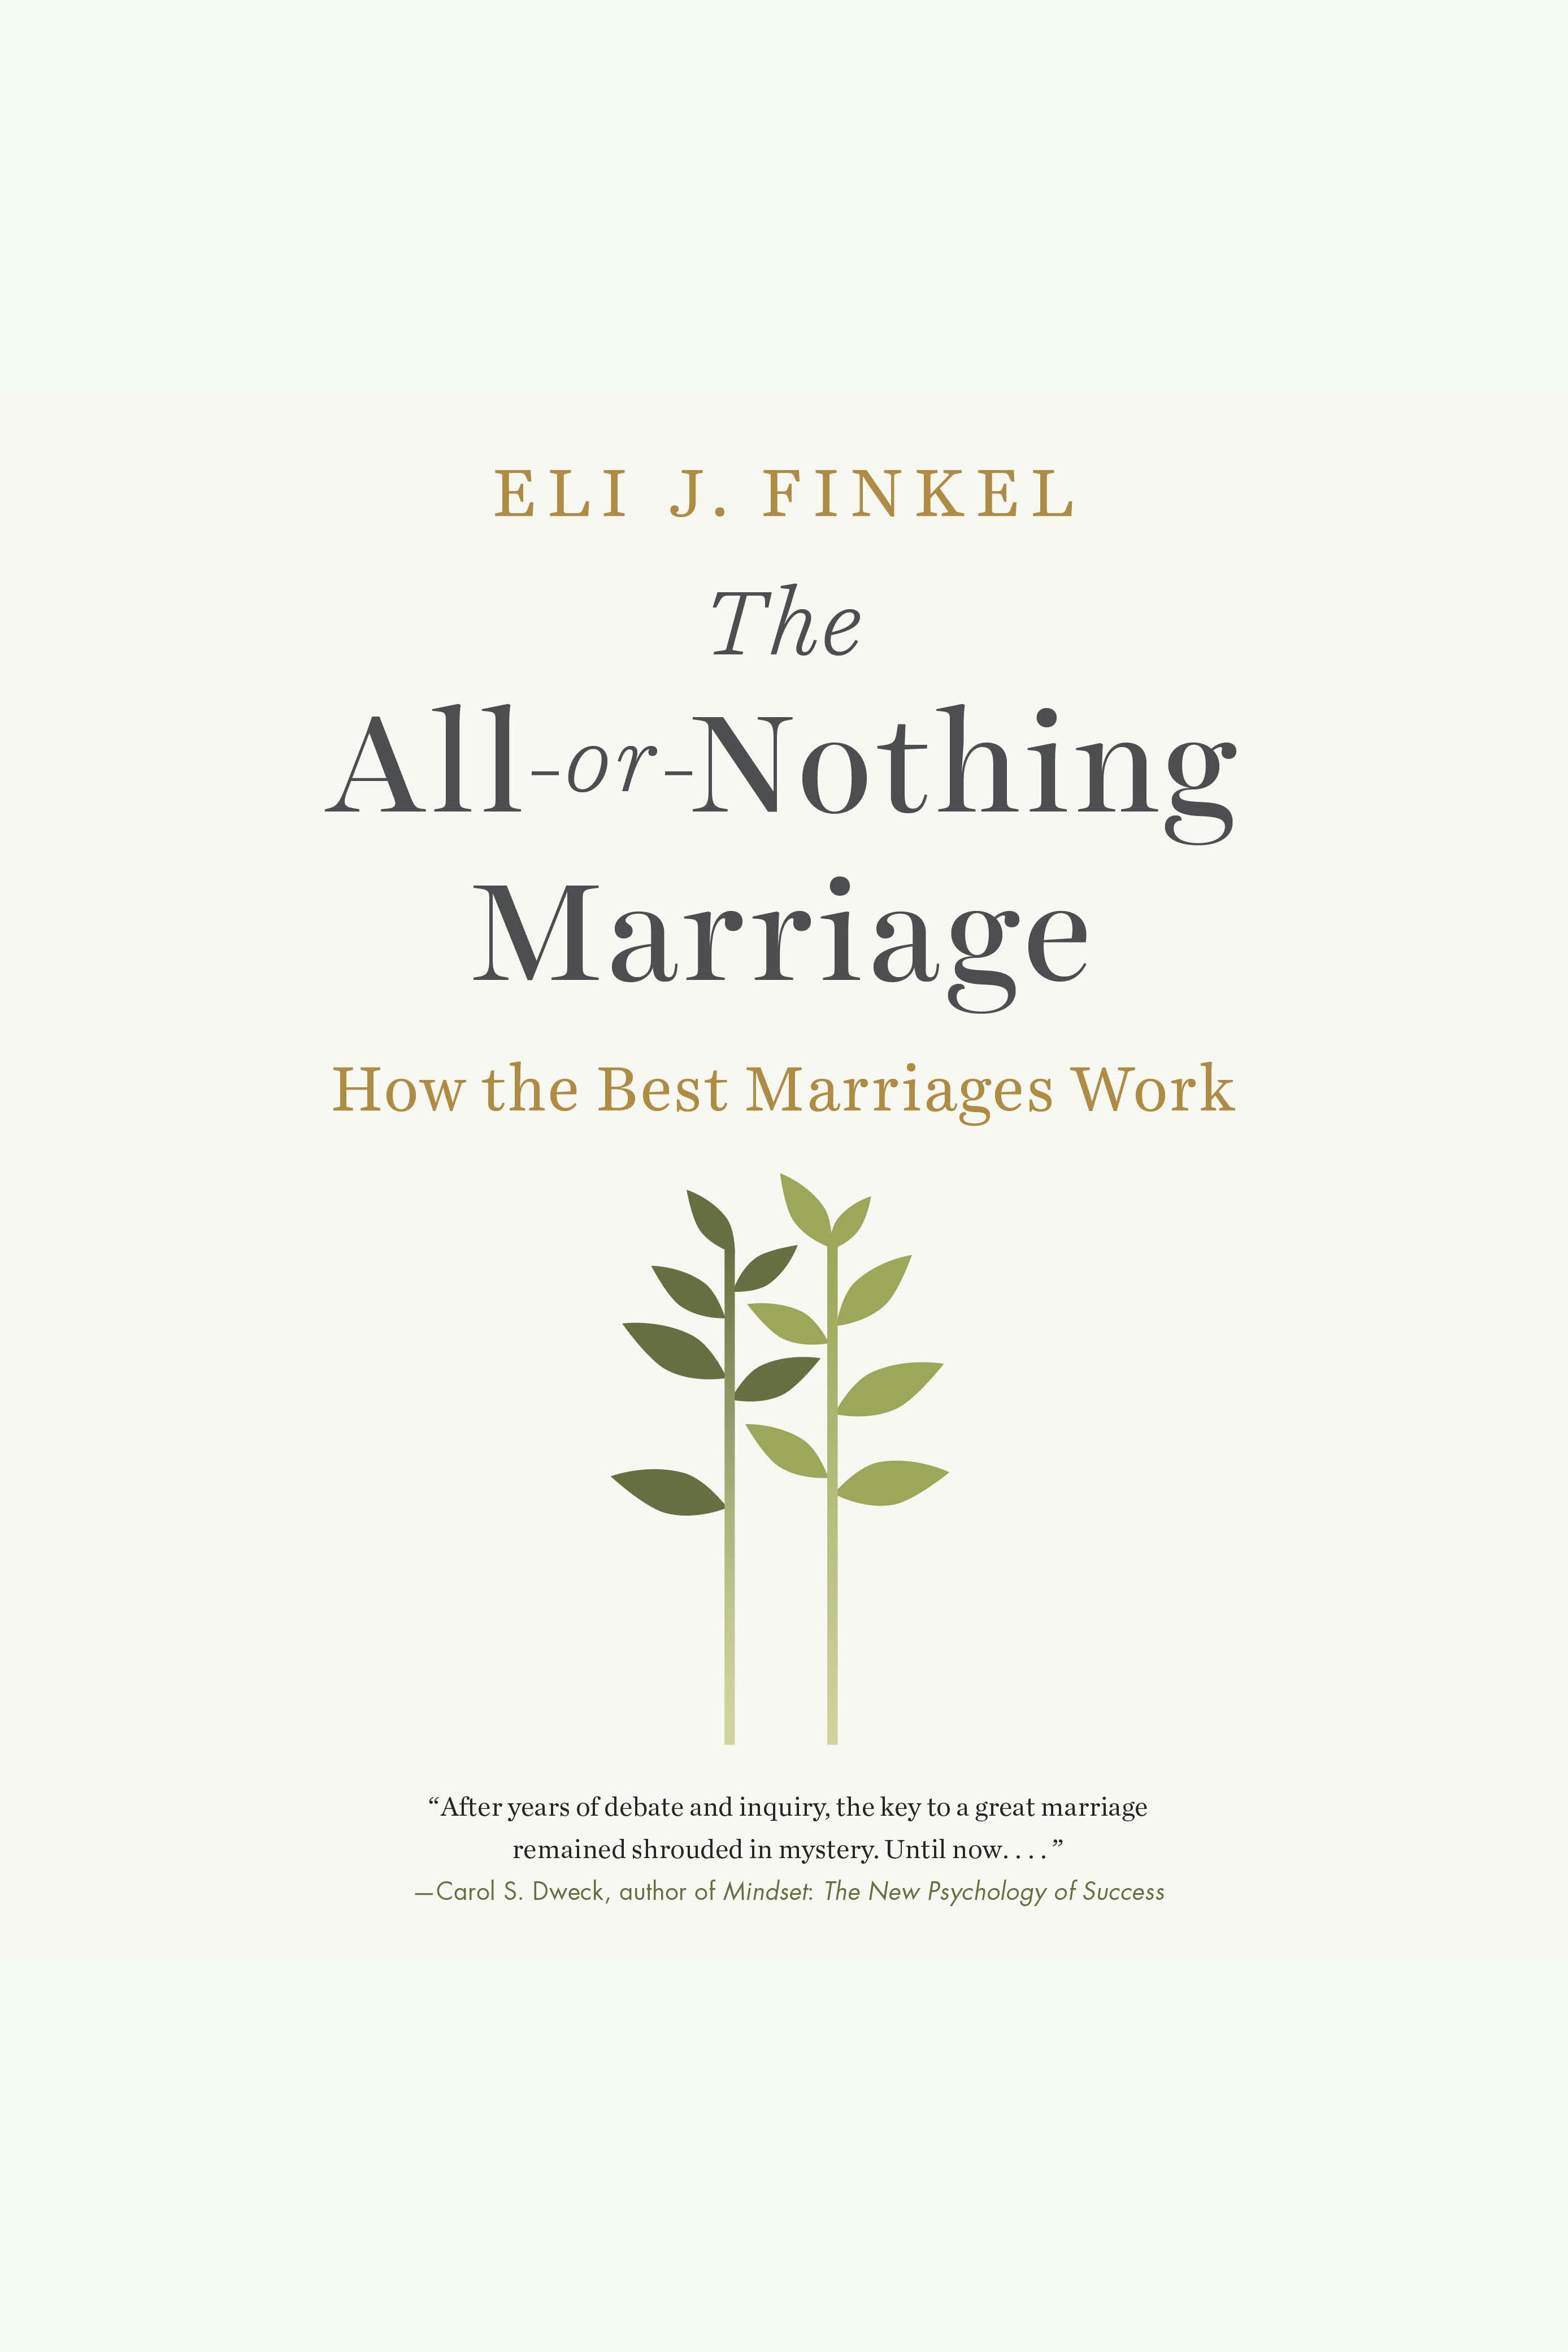 The All-or-Nothing Marriage how the best marriages work cover image